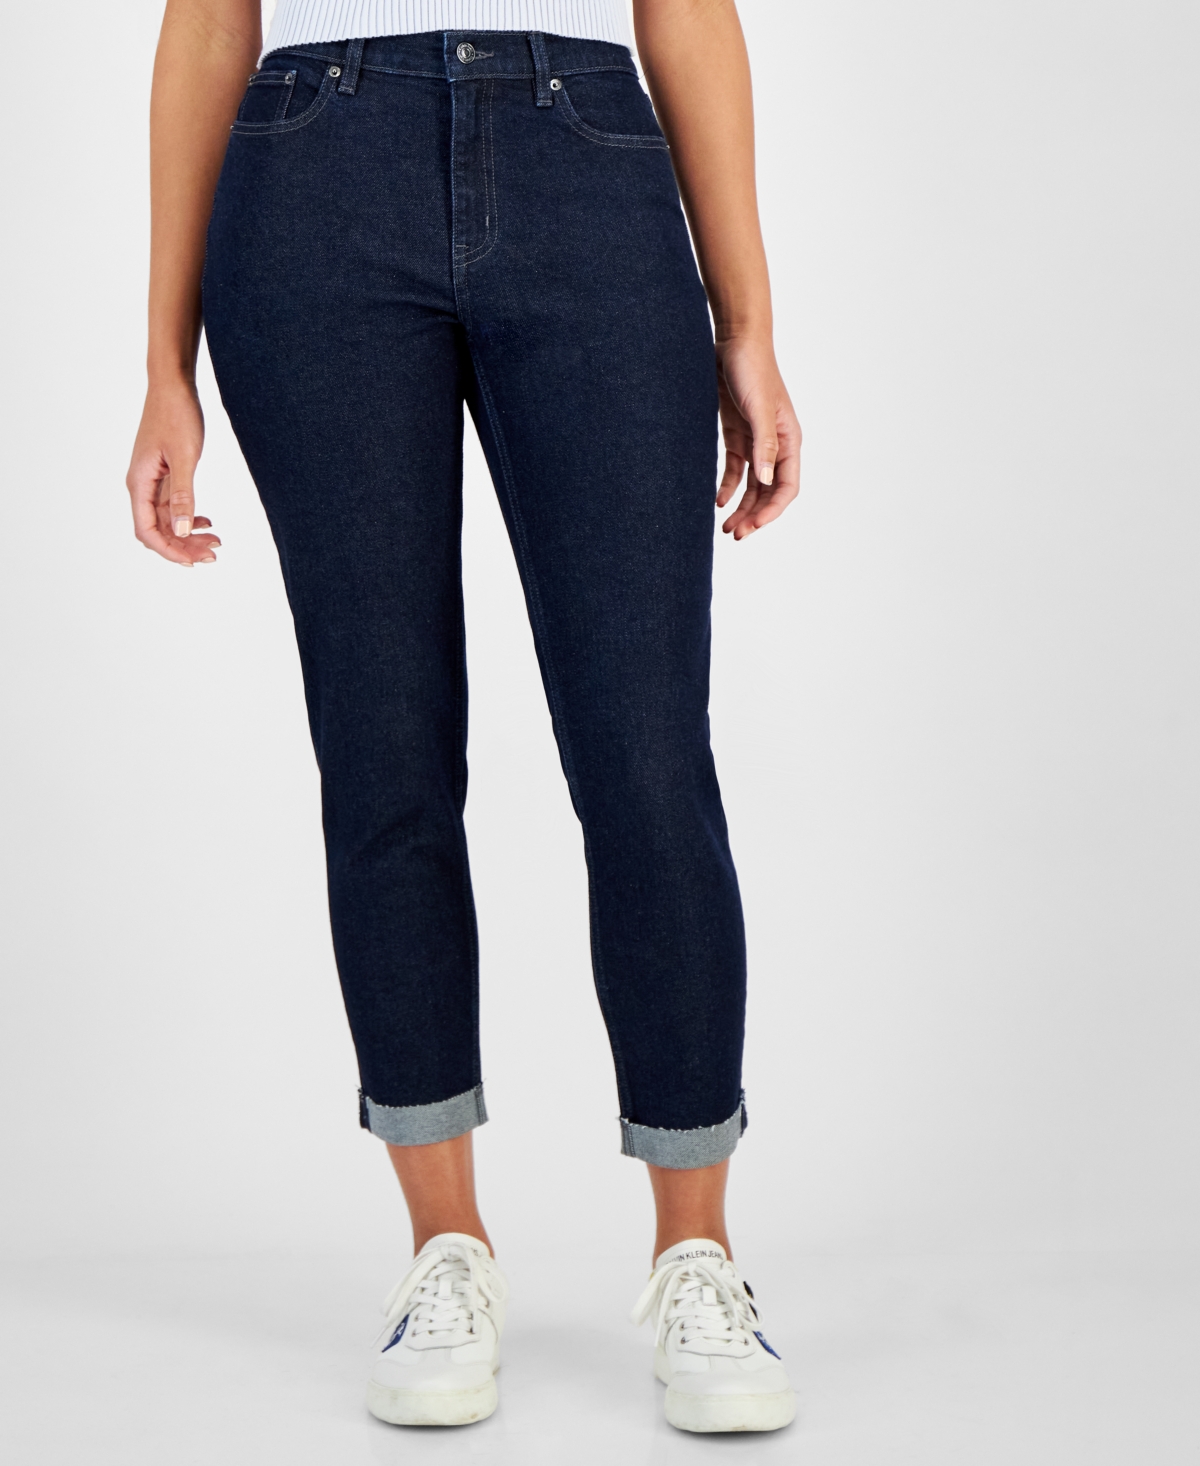 Women's Mid-Rise Tapered Slim Jeans - Concord